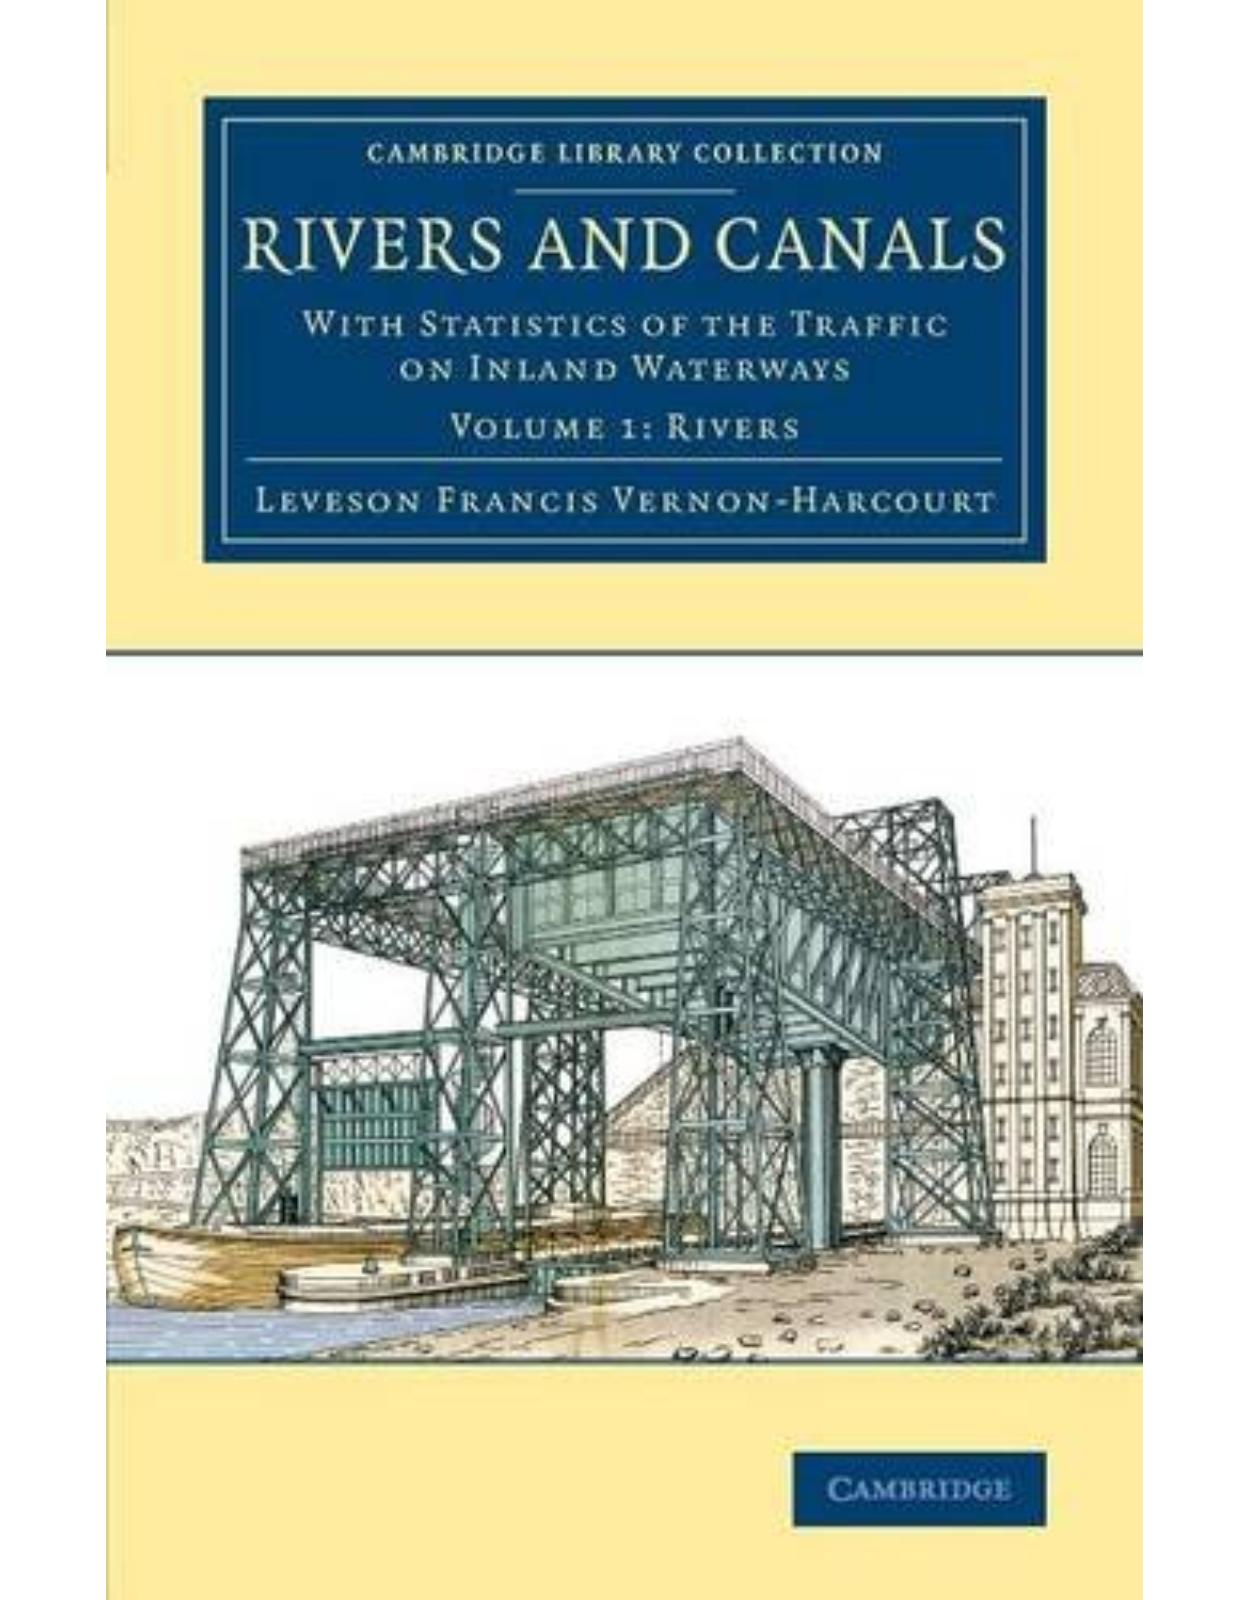 Rivers and Canals 2 Volume Set: Rivers and Canals: With Statistics of the Traffic on Inland Waterways: Volume 1 (Cambridge Library Collection - Technology)